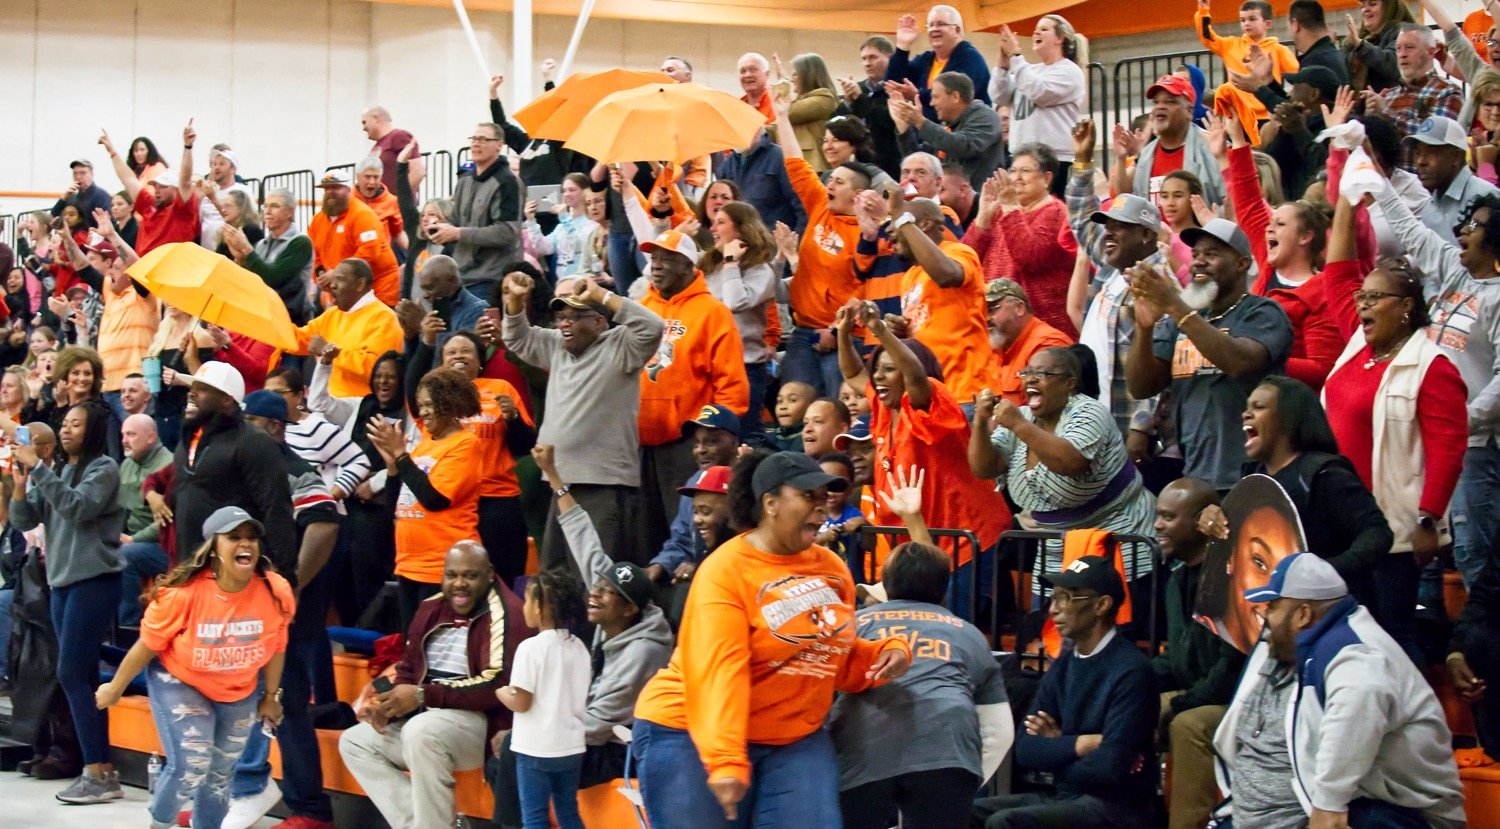 The crowd filled the stands in Grand Saline and their cheers filled the rafters.